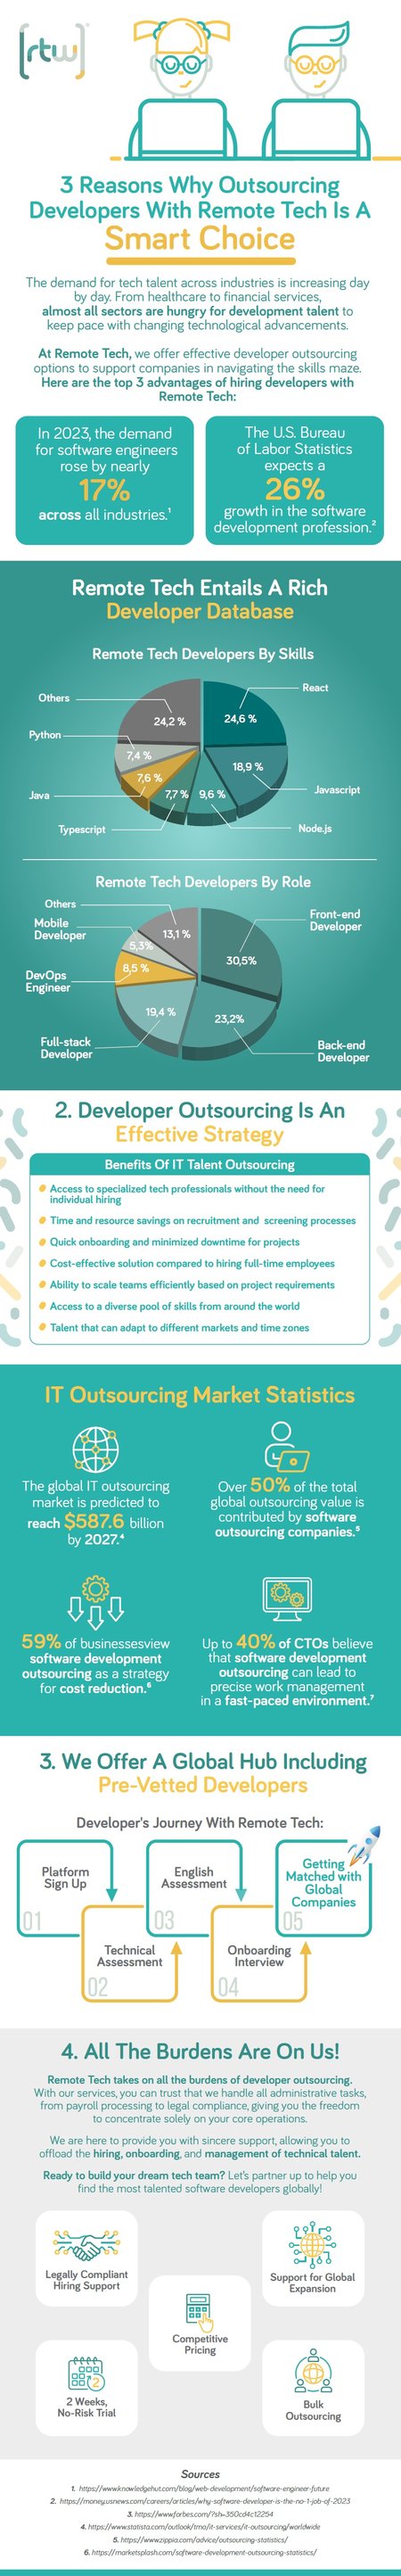 Remotetechwork-infographic-3 Reasons why outsourcing developers with remote tech is a smart choise